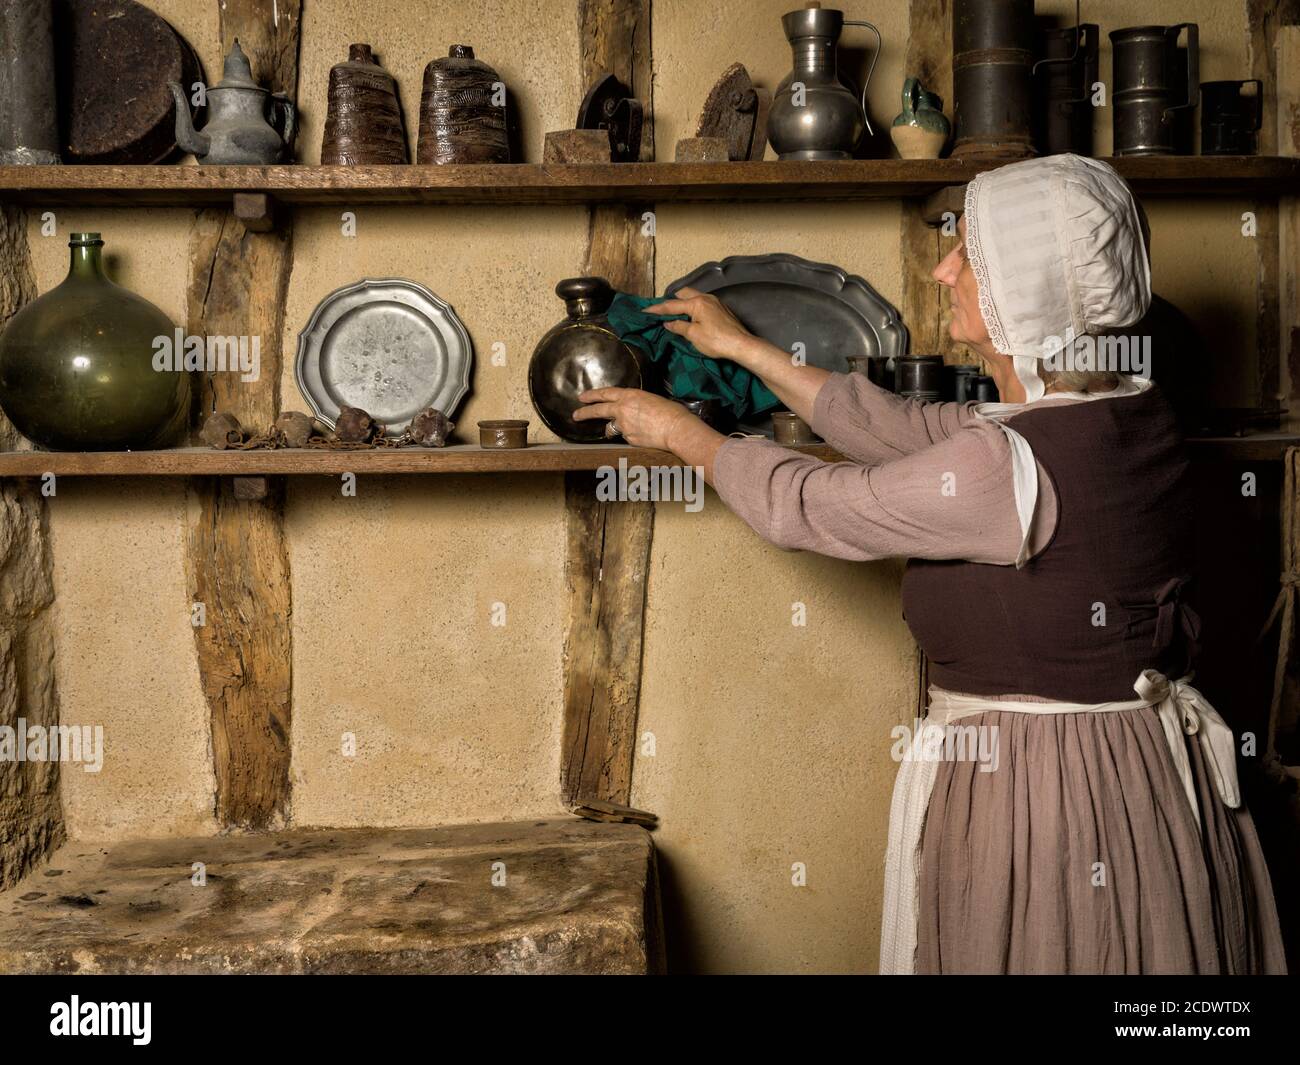 Woman dressed as a medieval peasant maid working in an authentic kitchen in a French castle Stock Photo